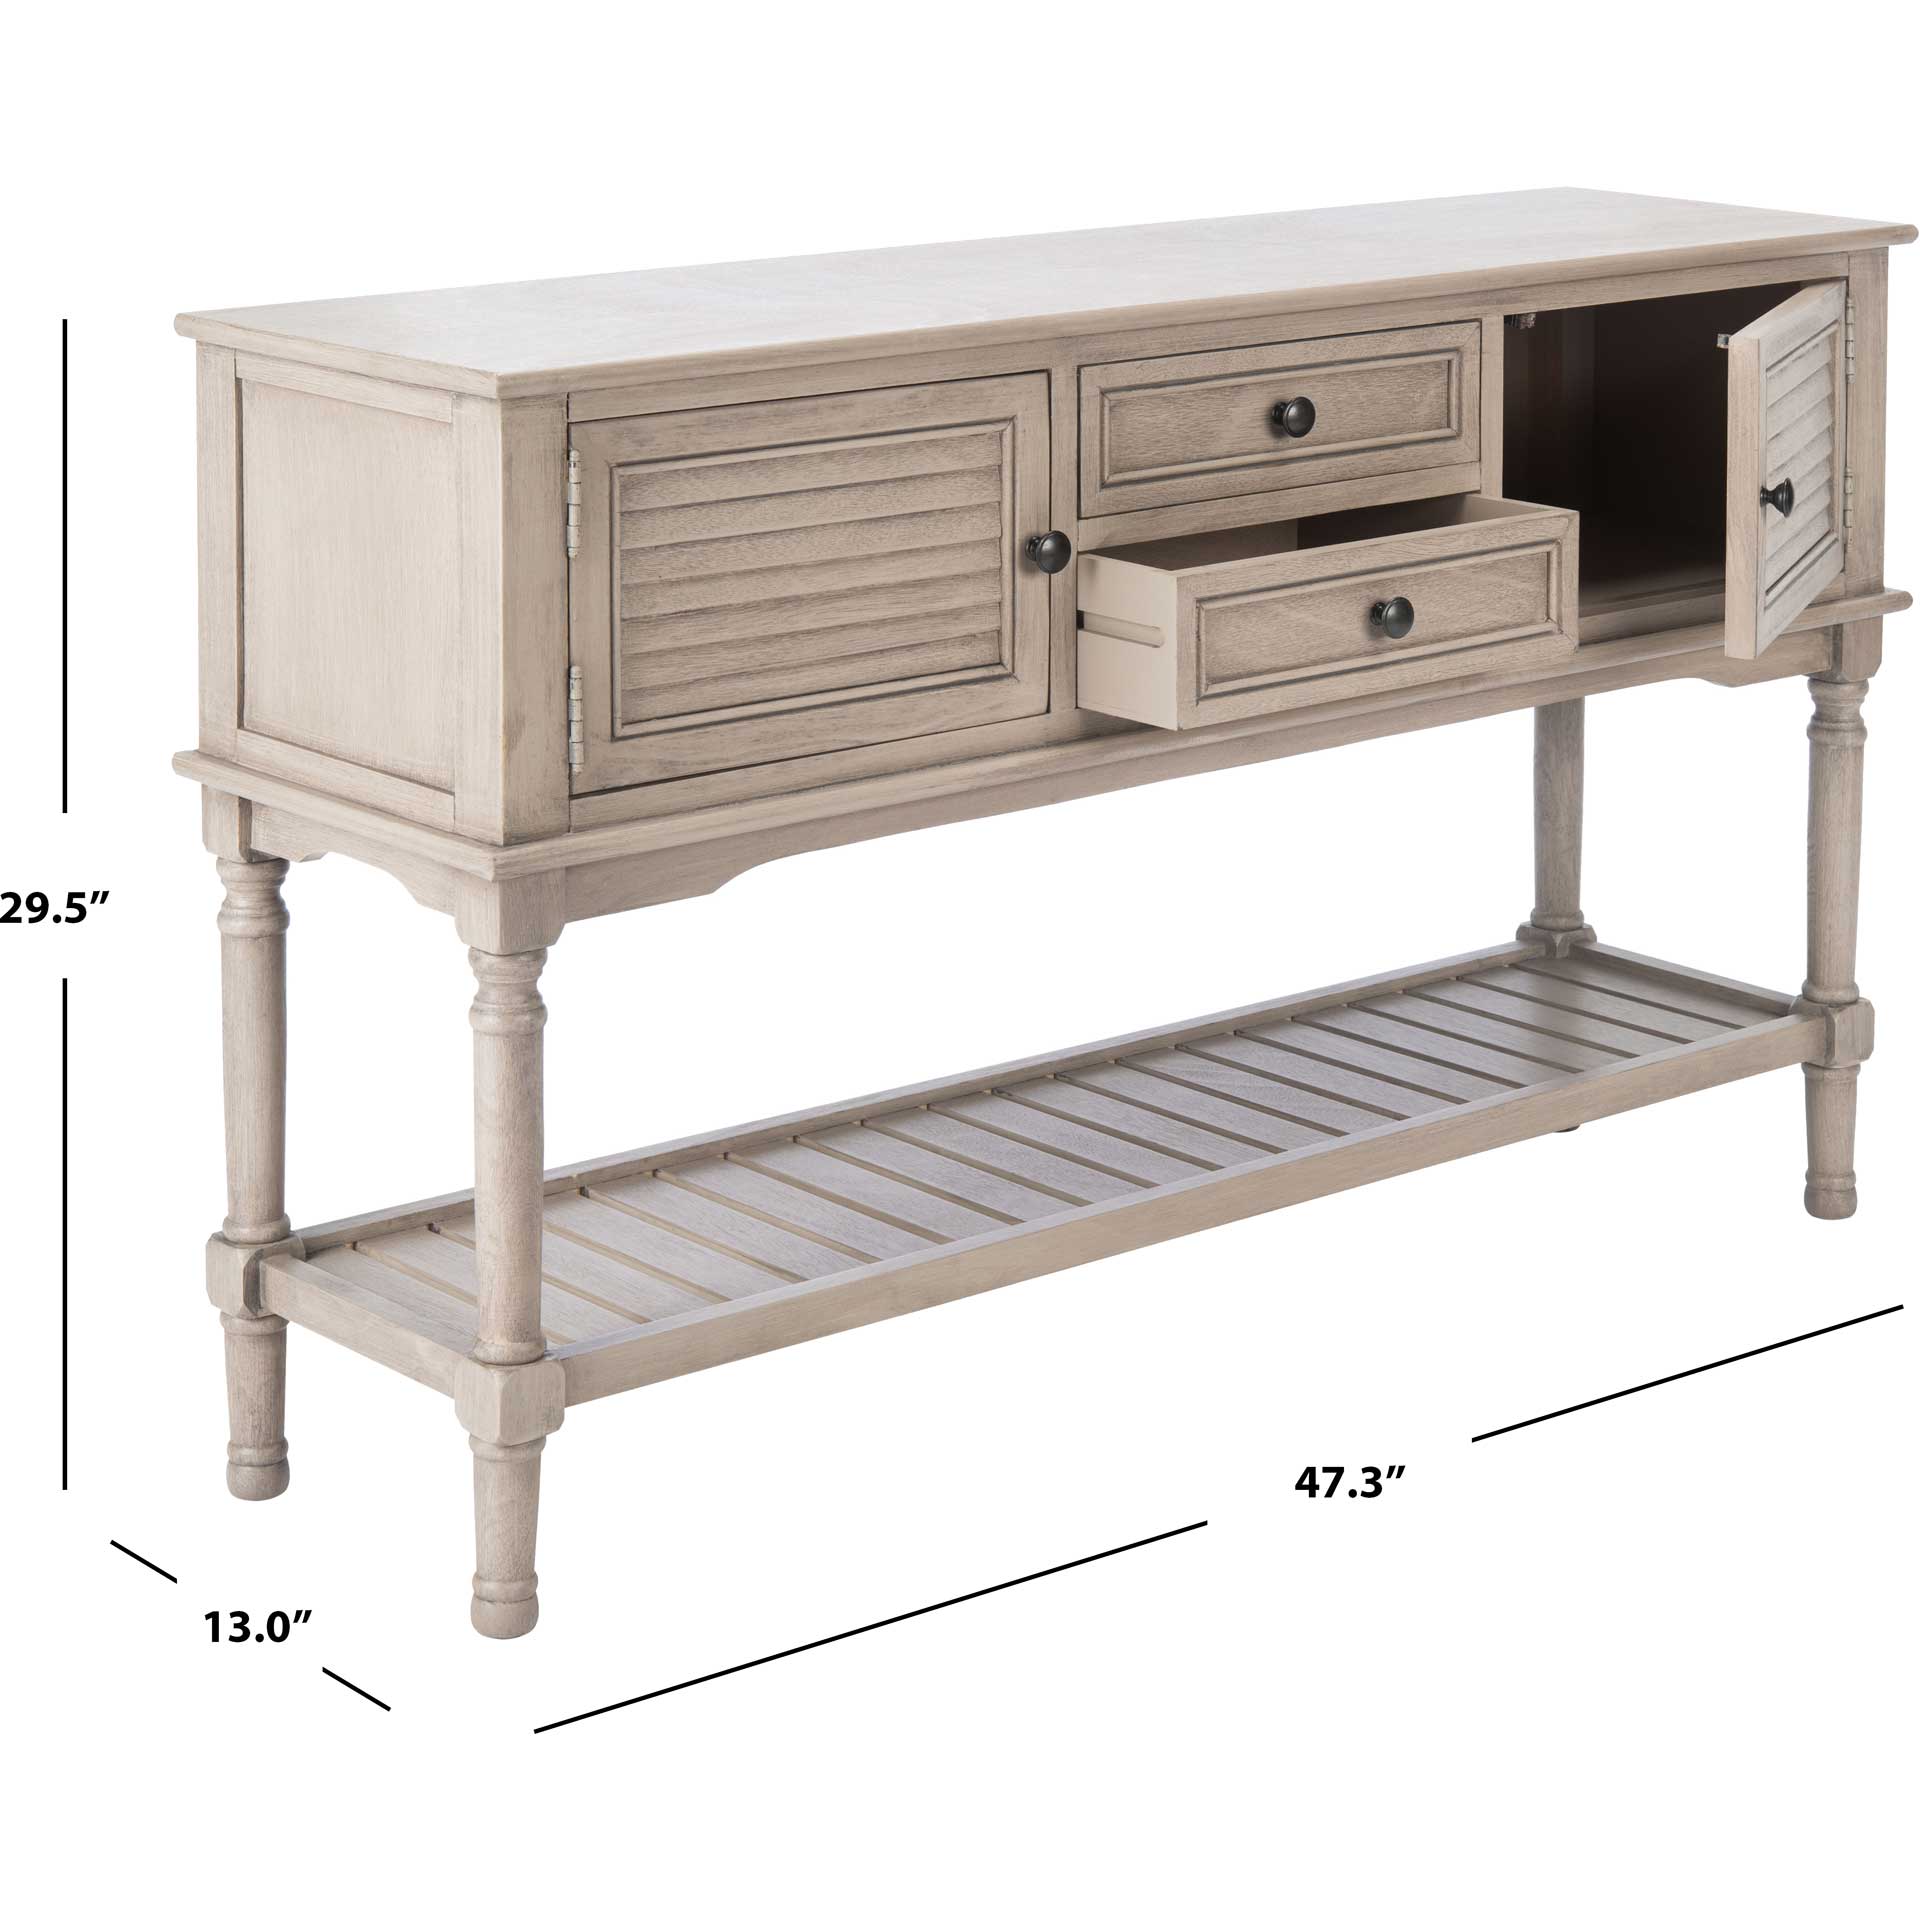 Talita 2 Drawer 2 Door Console Table Greige